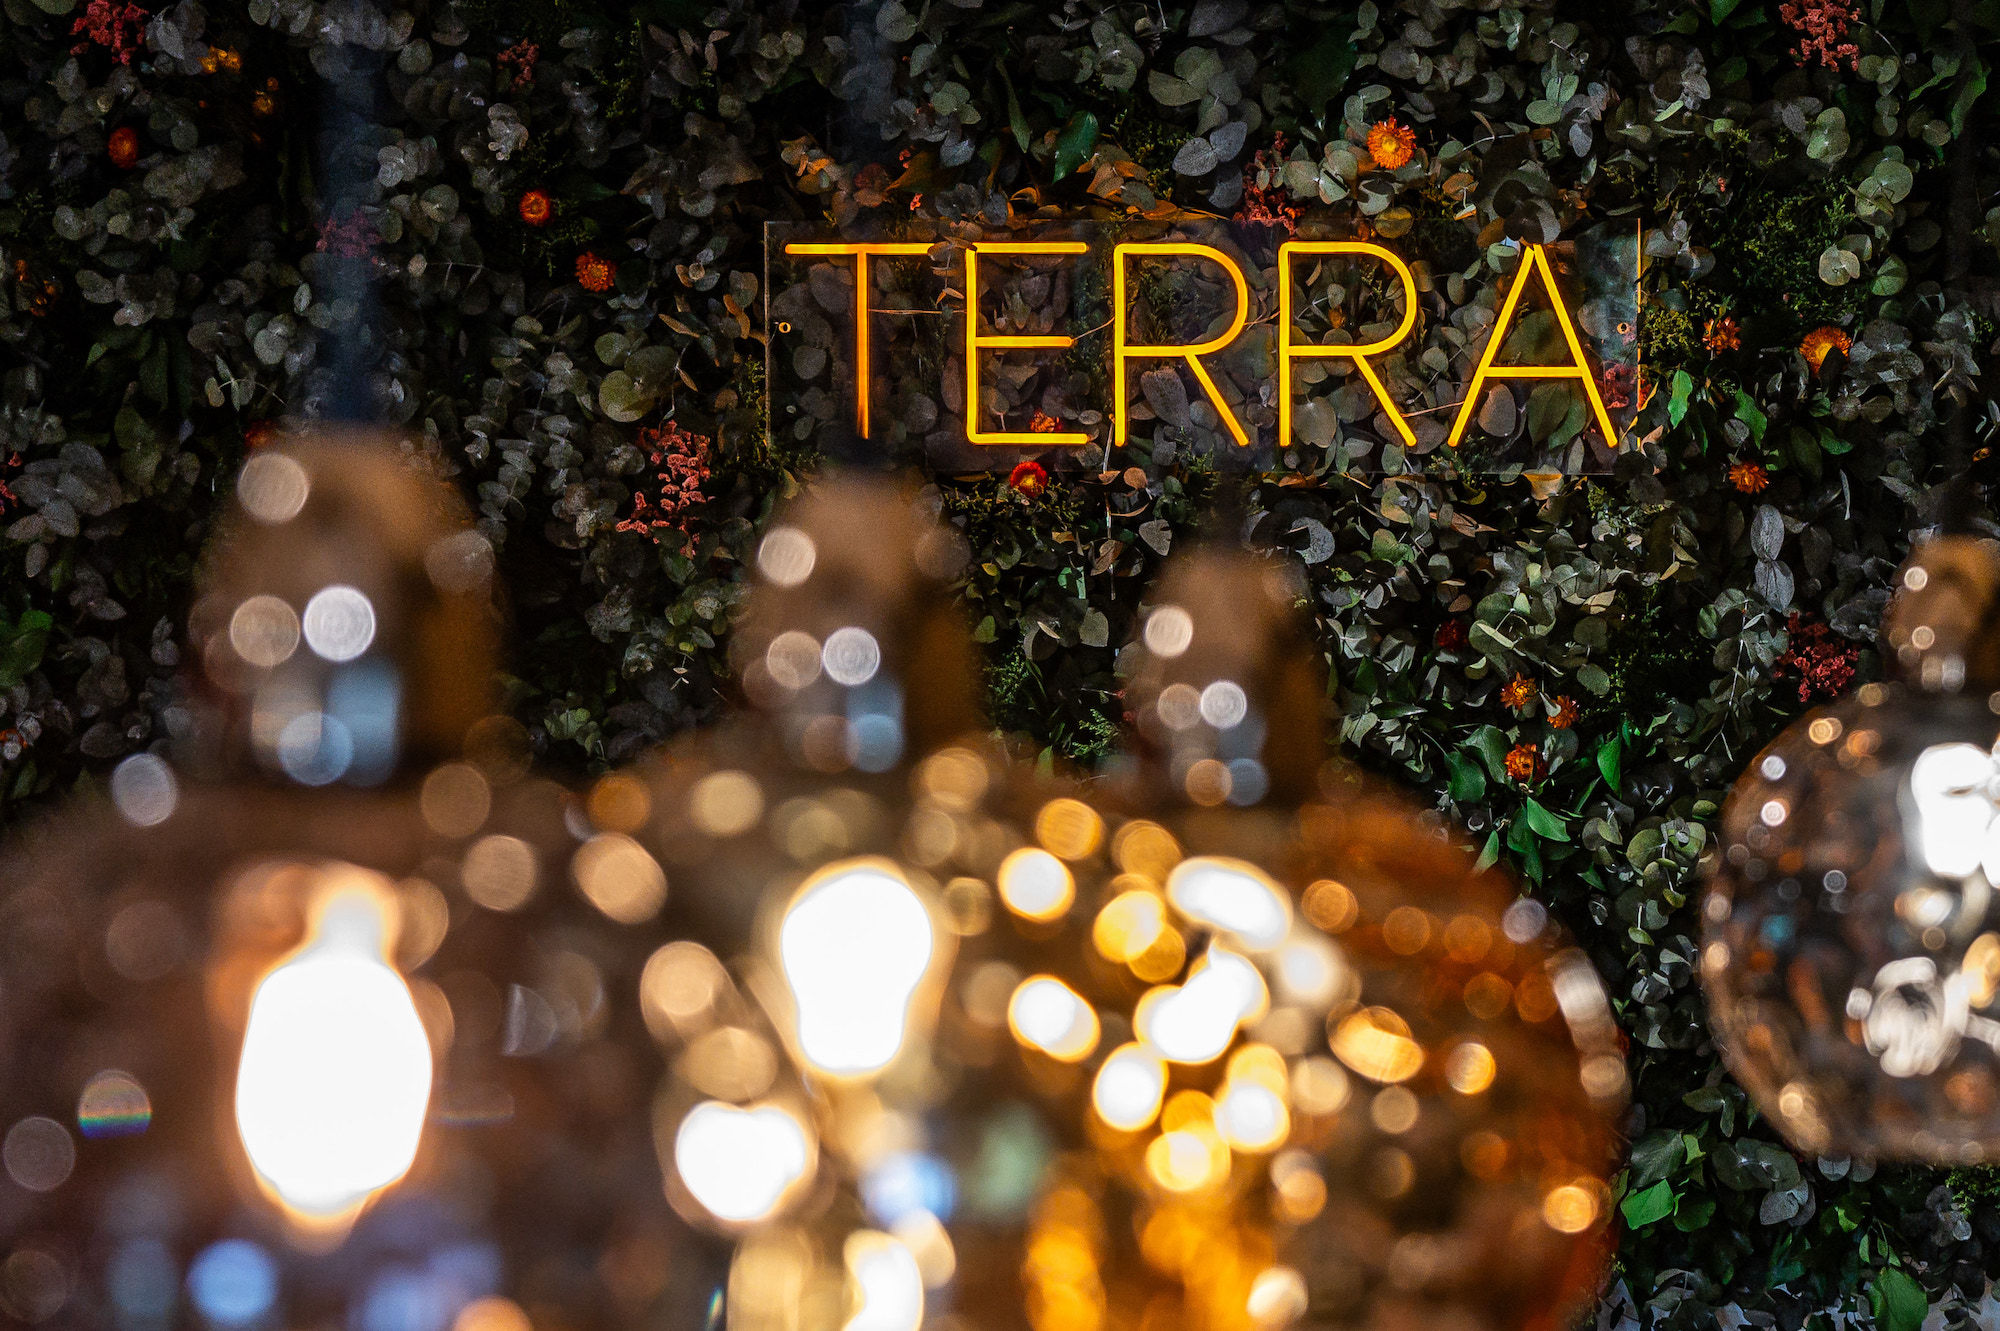 Terra restaurant signage situated within a backdrop of fresh green foliage. In the foreground are orange hued lights slightly out of focus. 